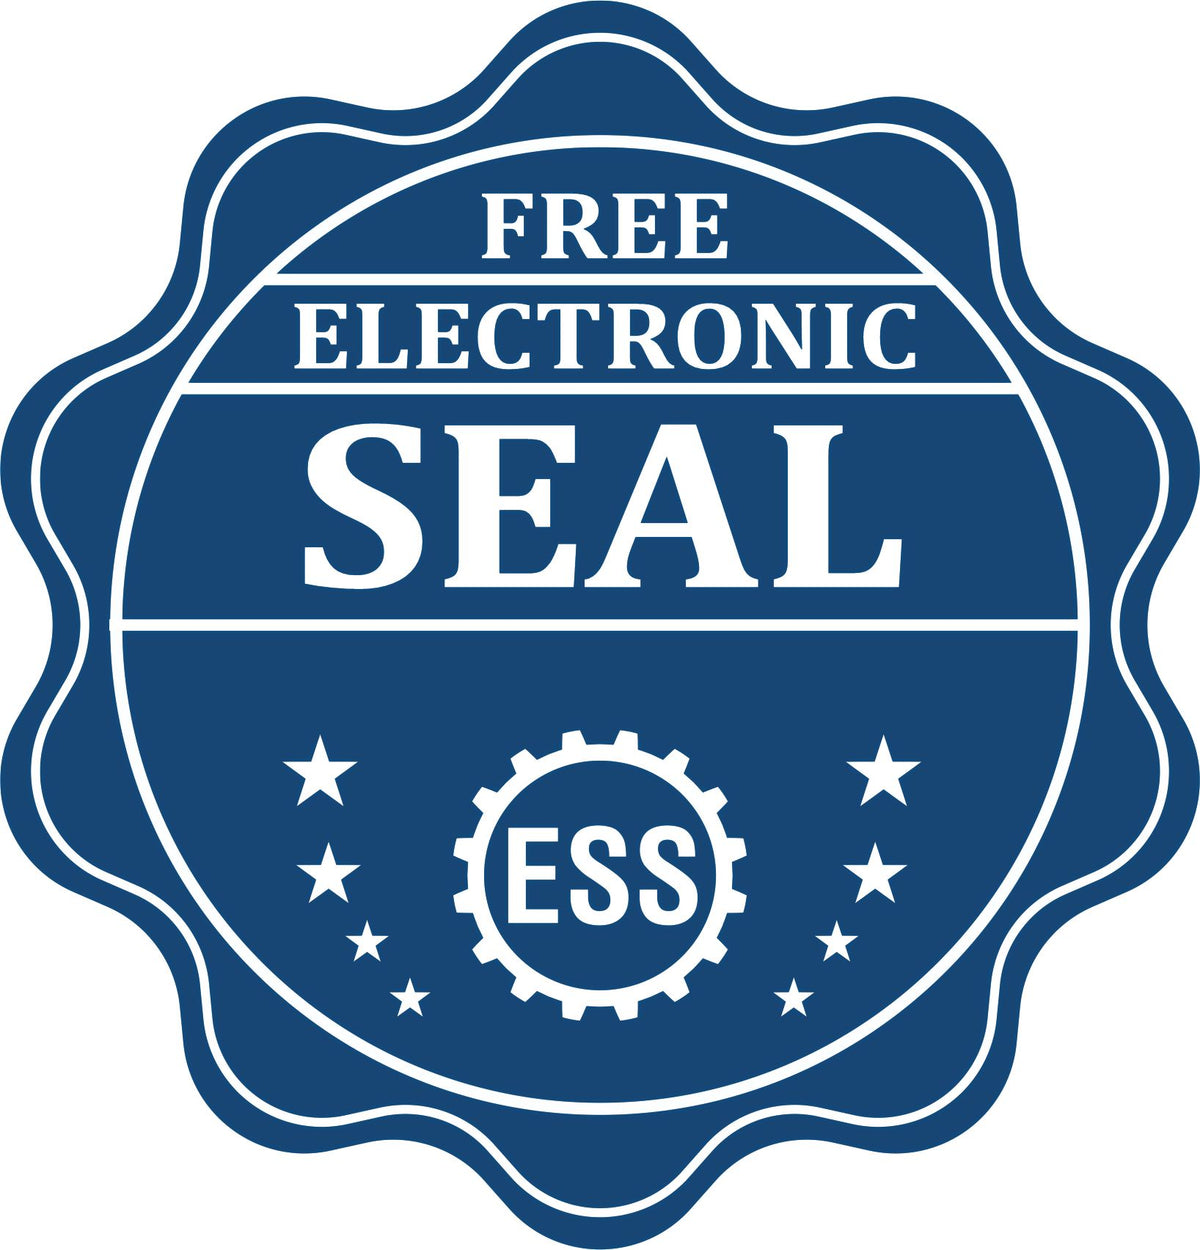 A badge showing a free electronic seal for the Handheld South Dakota Professional Geologist Embosser with stars and the ESS gear on the emblem.